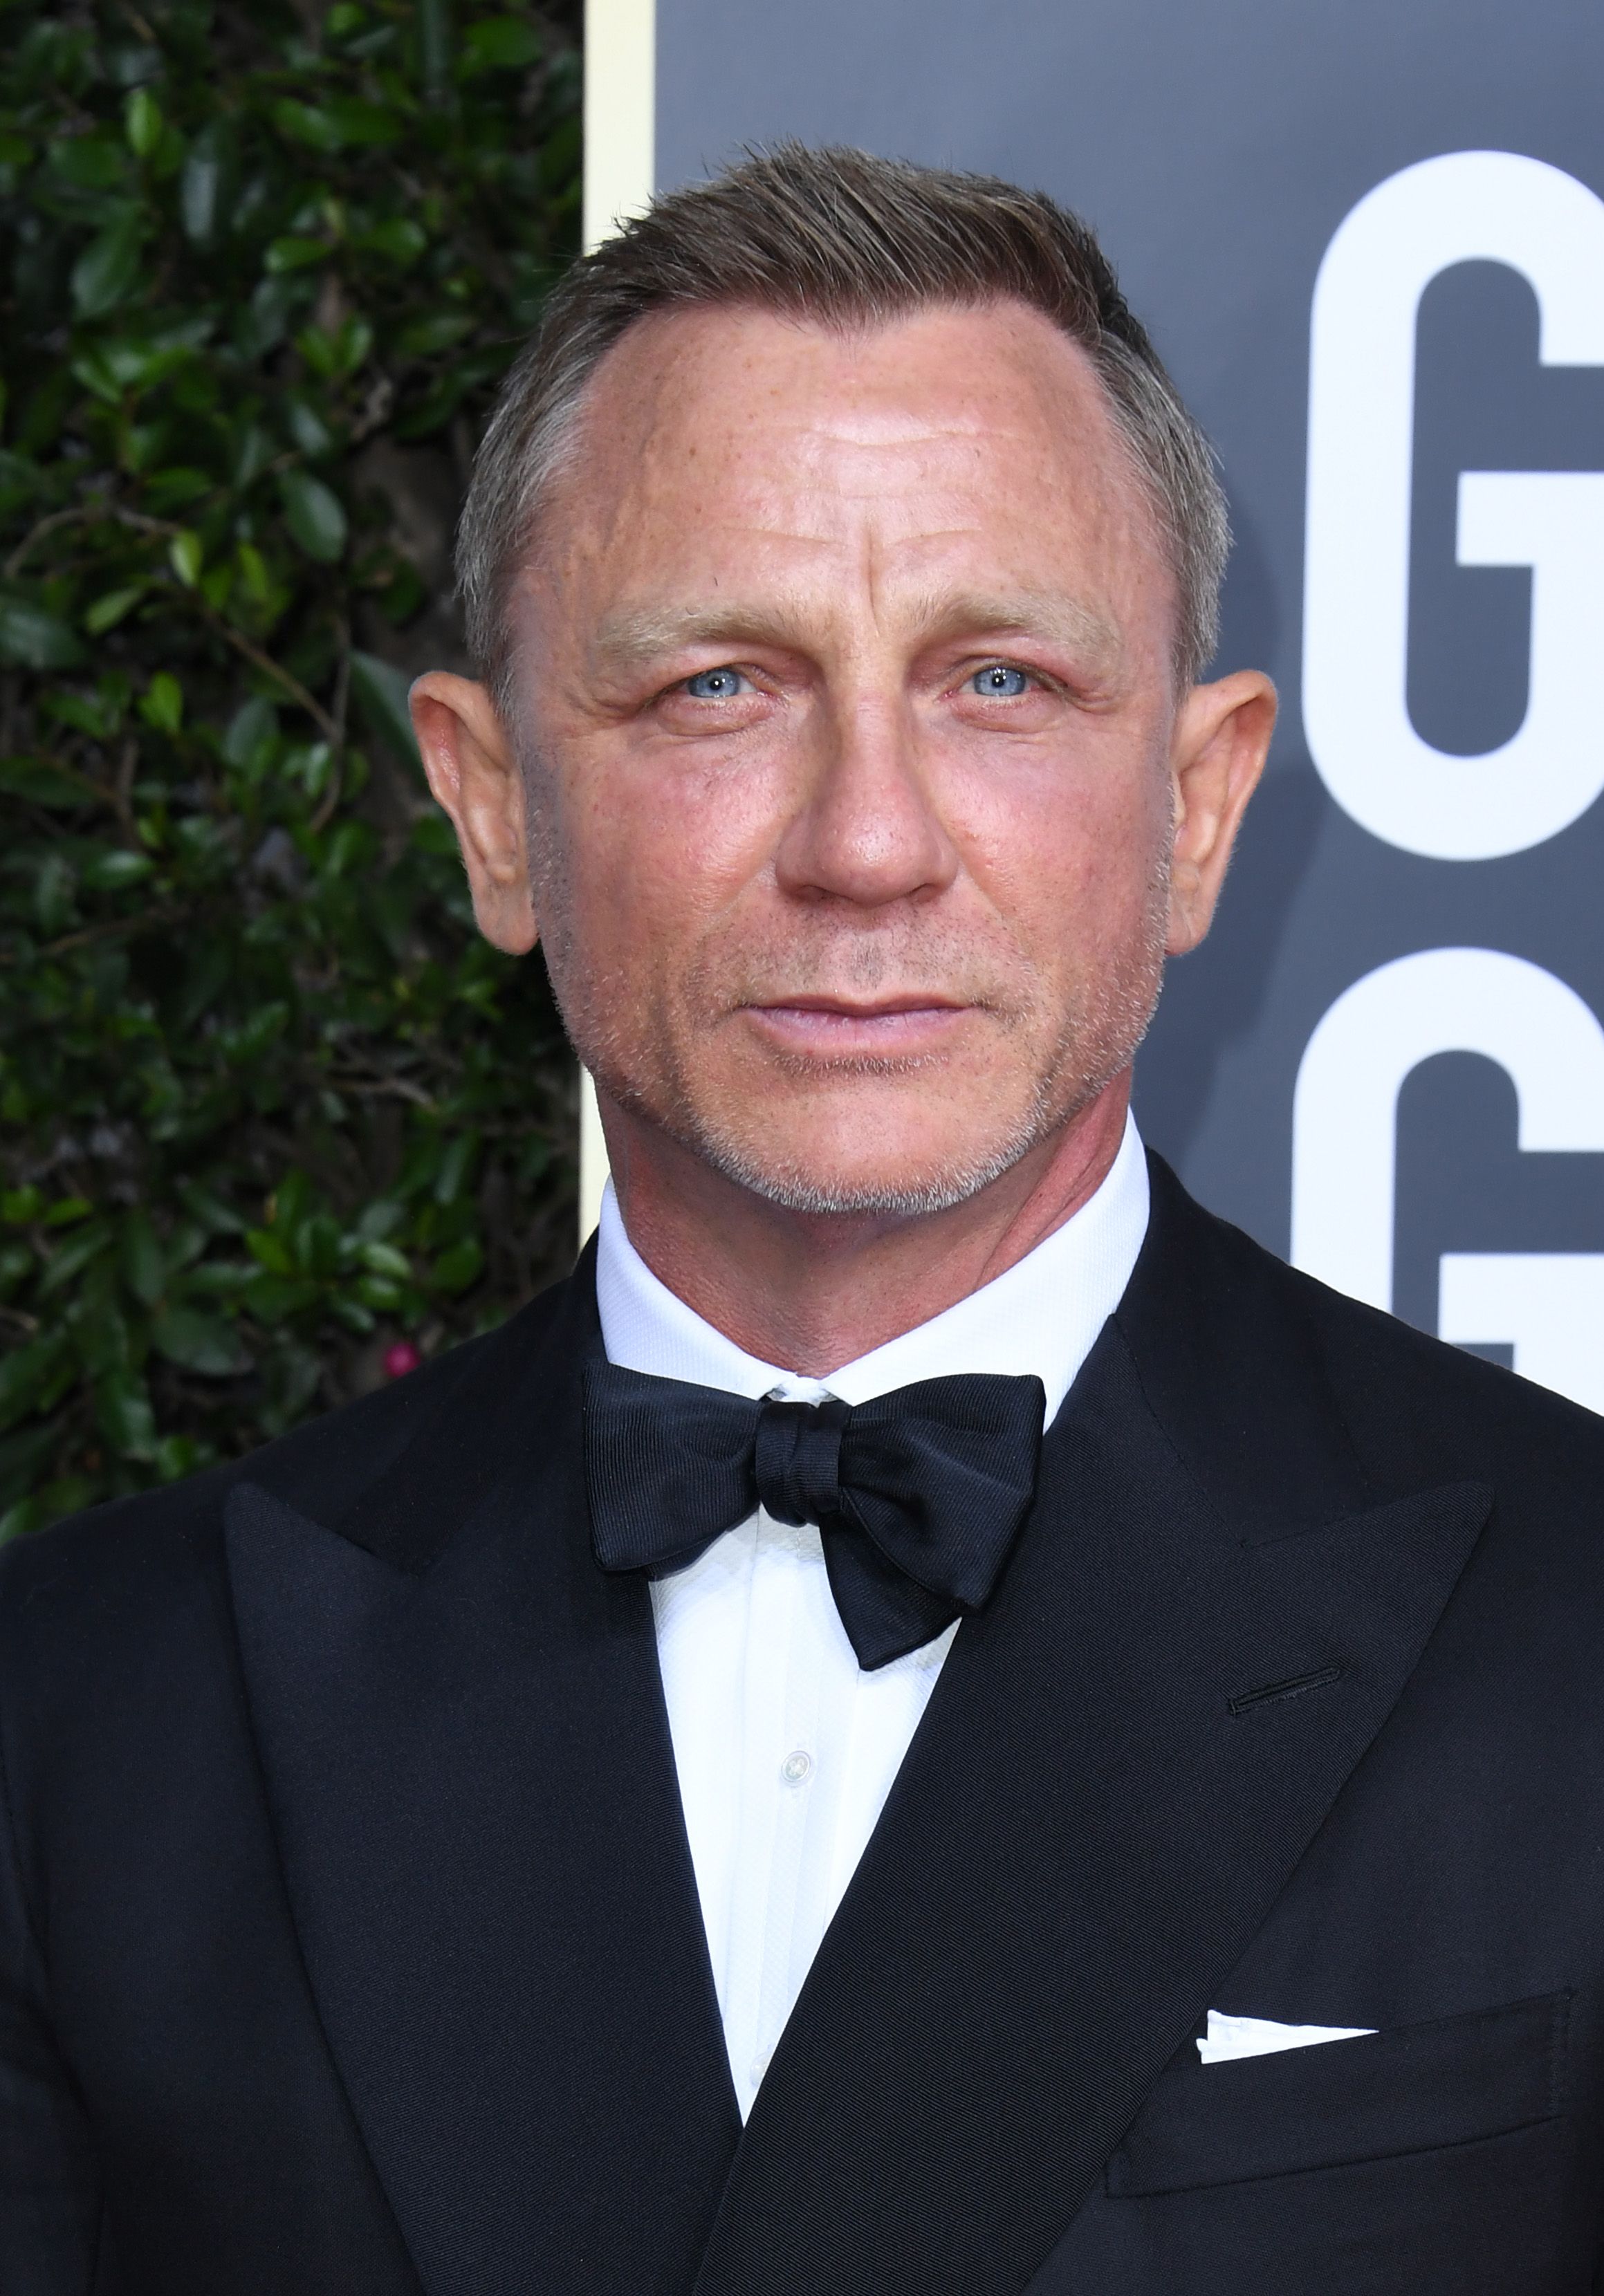 How To Get Daniel Craig's 'No Time To Die' James Bond Hair